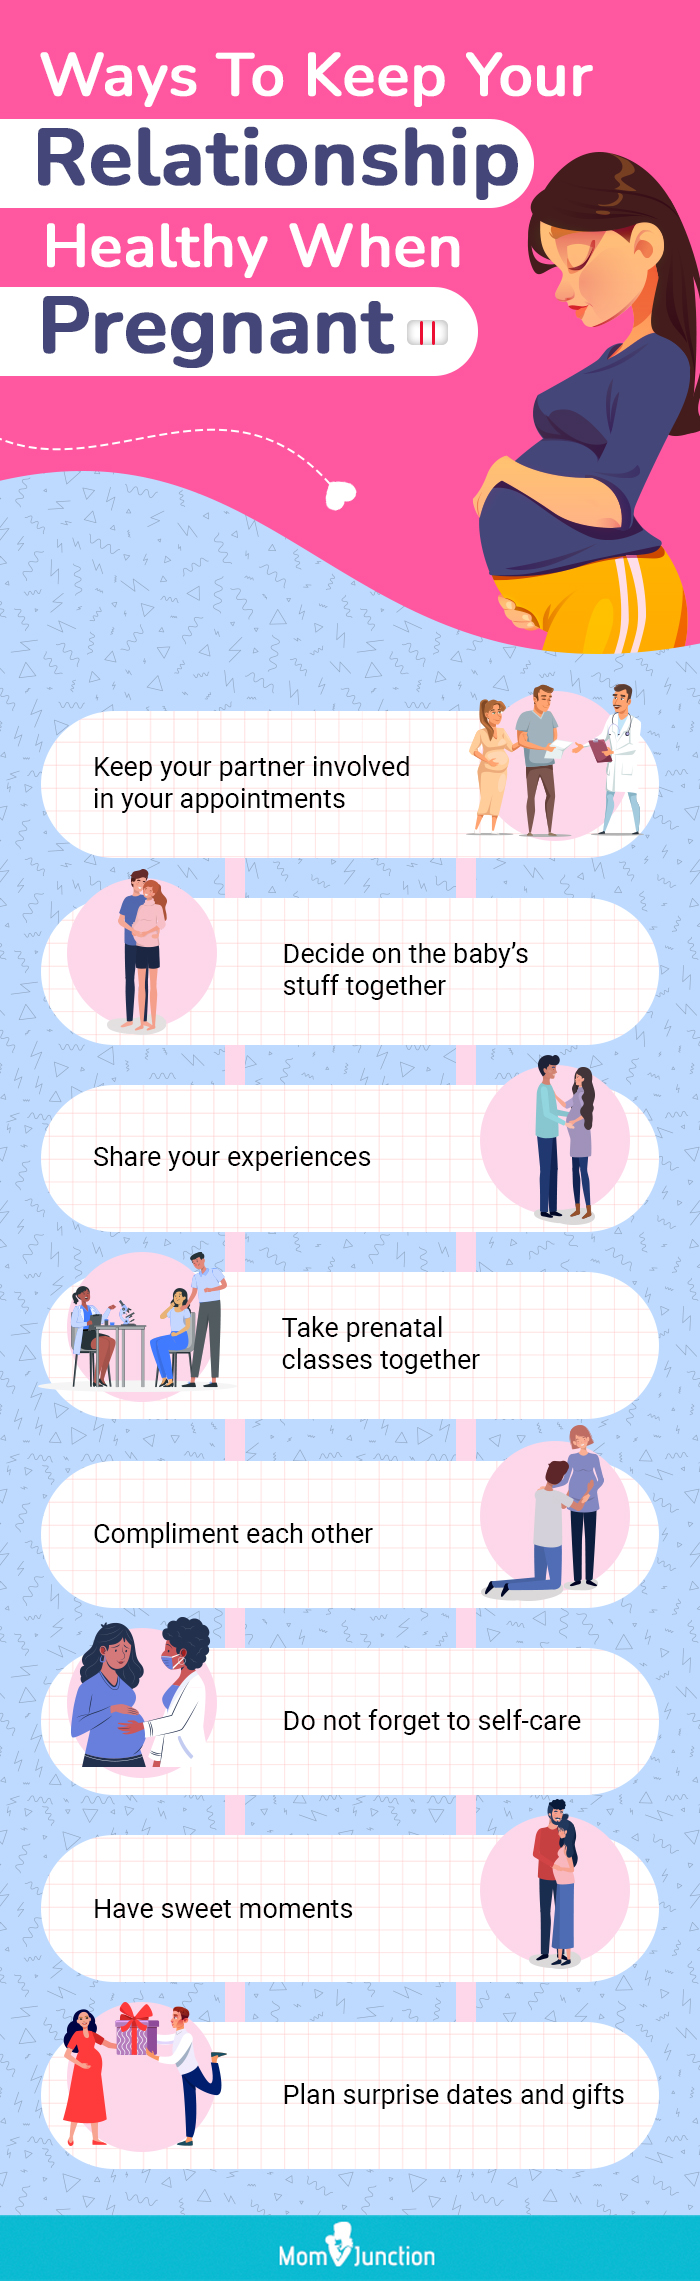 ways to keep your relationship healthy when pregnant [infographic]